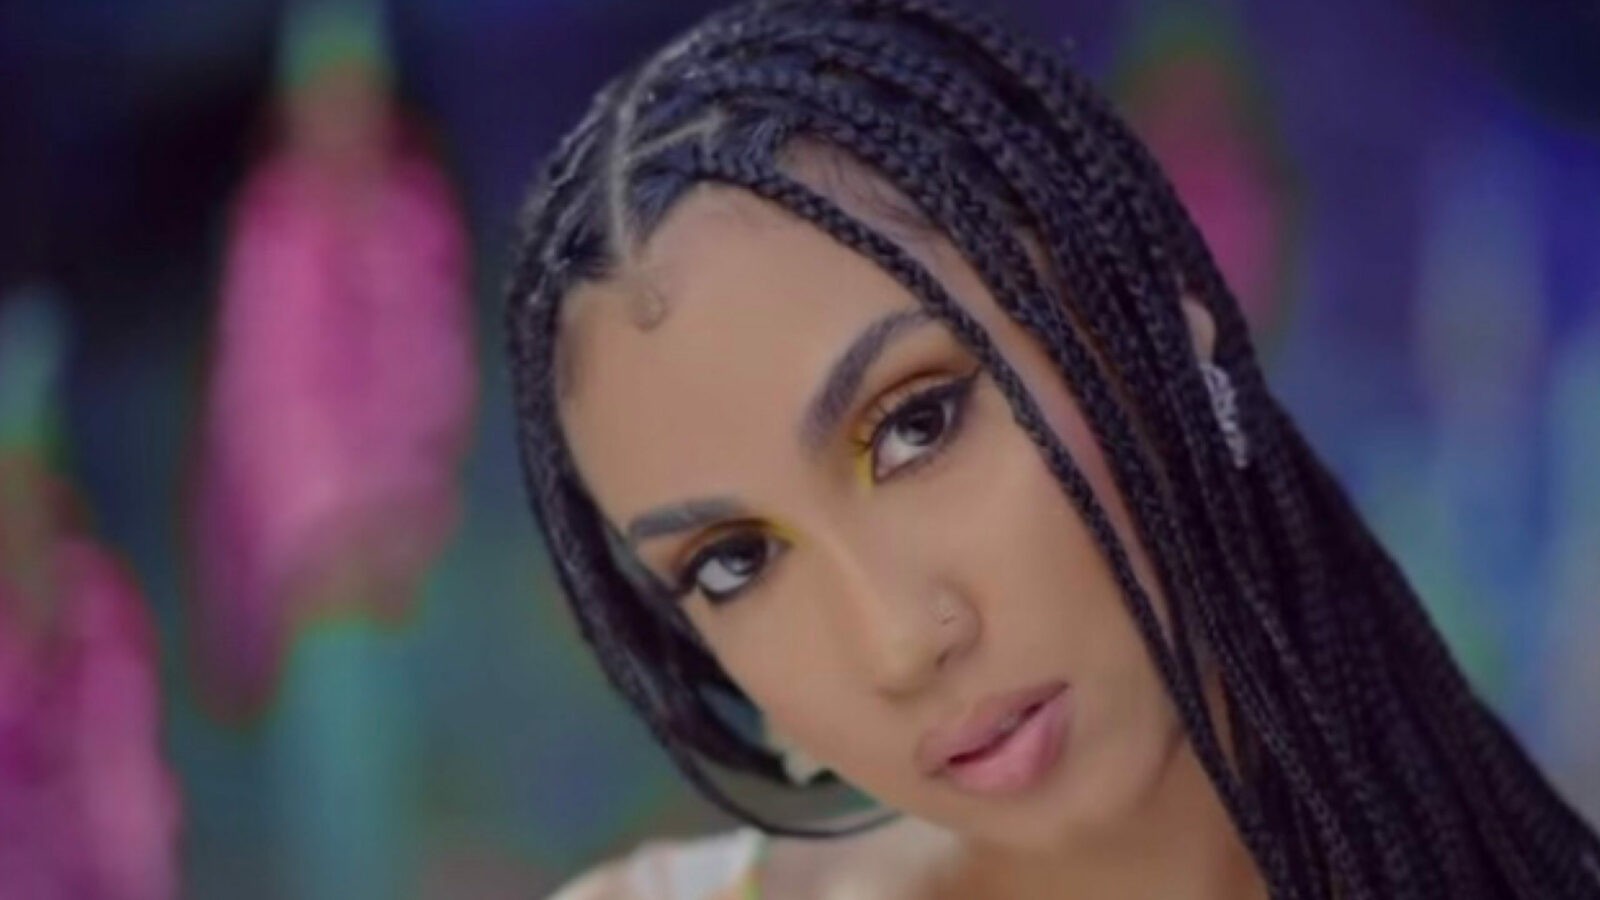  Queen Naija Denies Being a Colorist After Questionable Video Resurfaces On Twitter